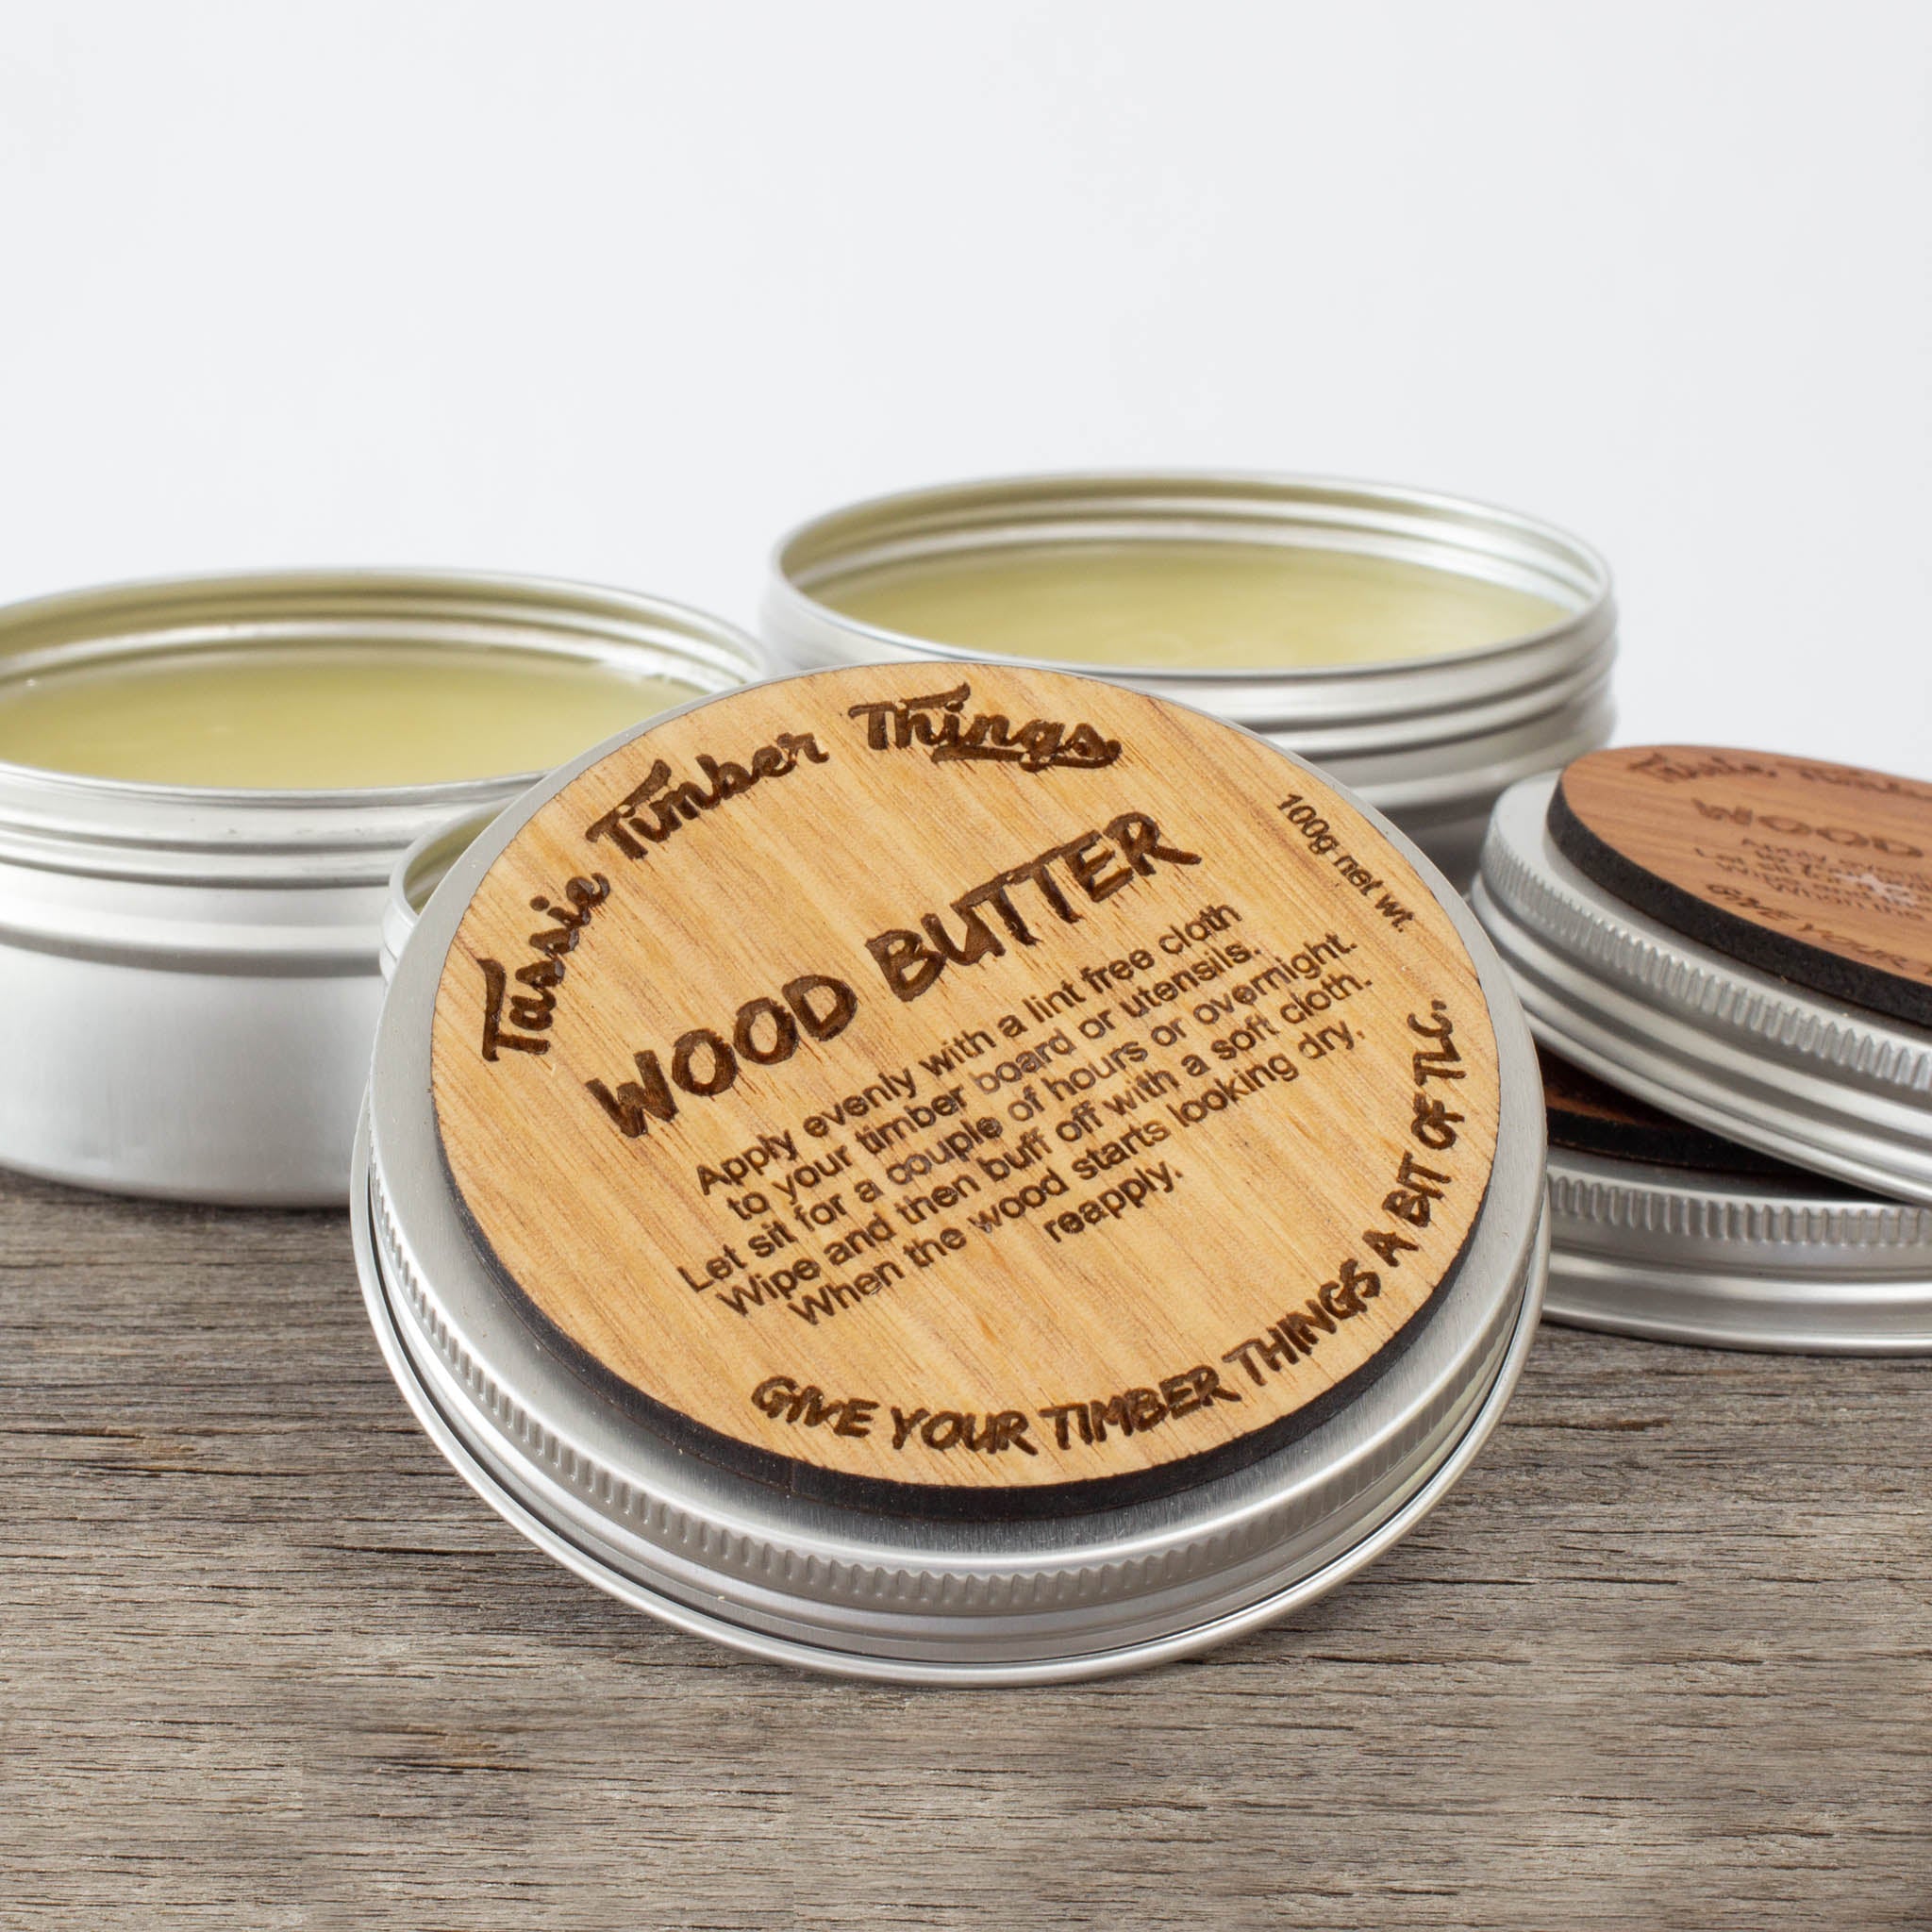 Wood Butter 100gms